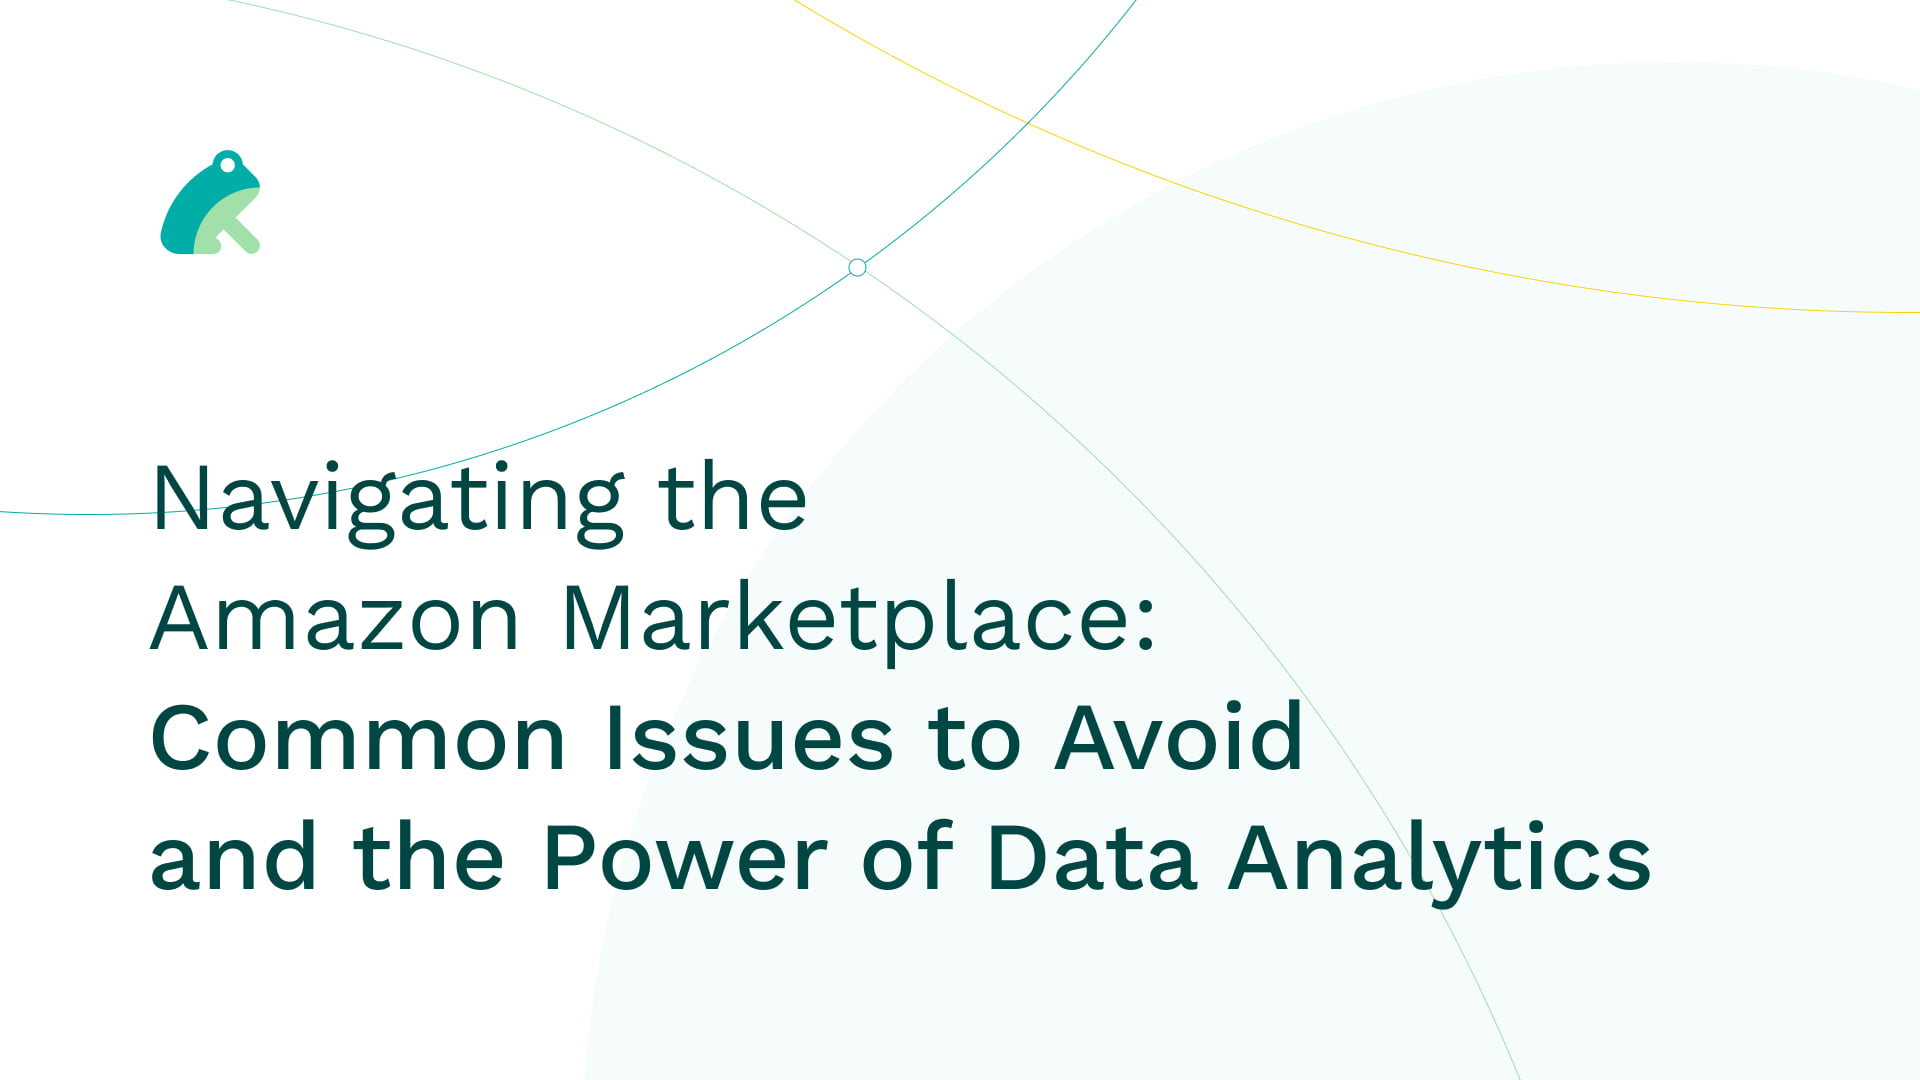 Navigating the Amazon Marketplace: Common Issues to Avoid and the Power of Data Analytics